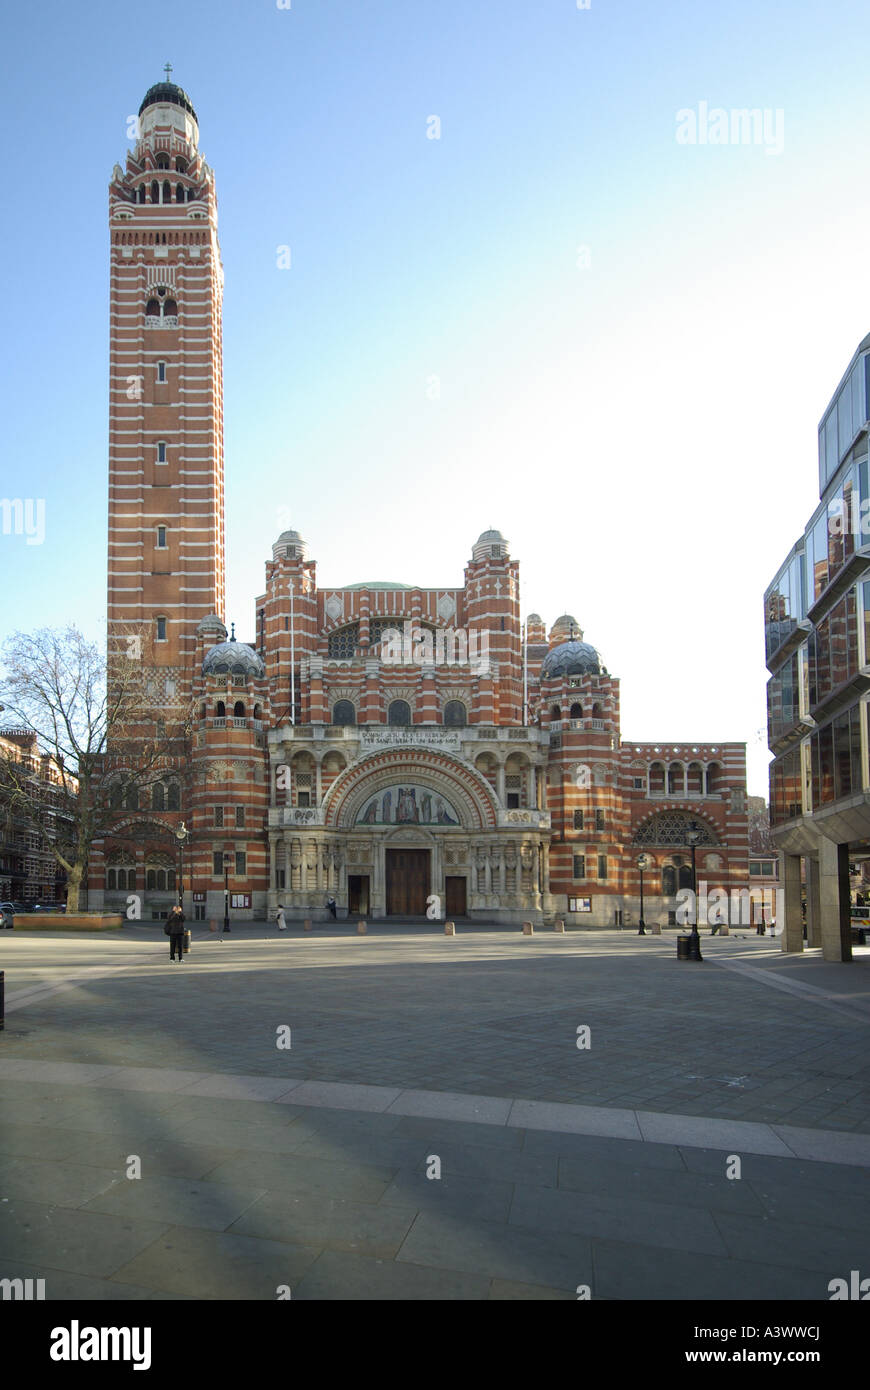 Neo Byzantine tower & main entrance to Roman Catholic religion Westminster Cathedral church built in striped brick & stone Victoria London England UK Stock Photo